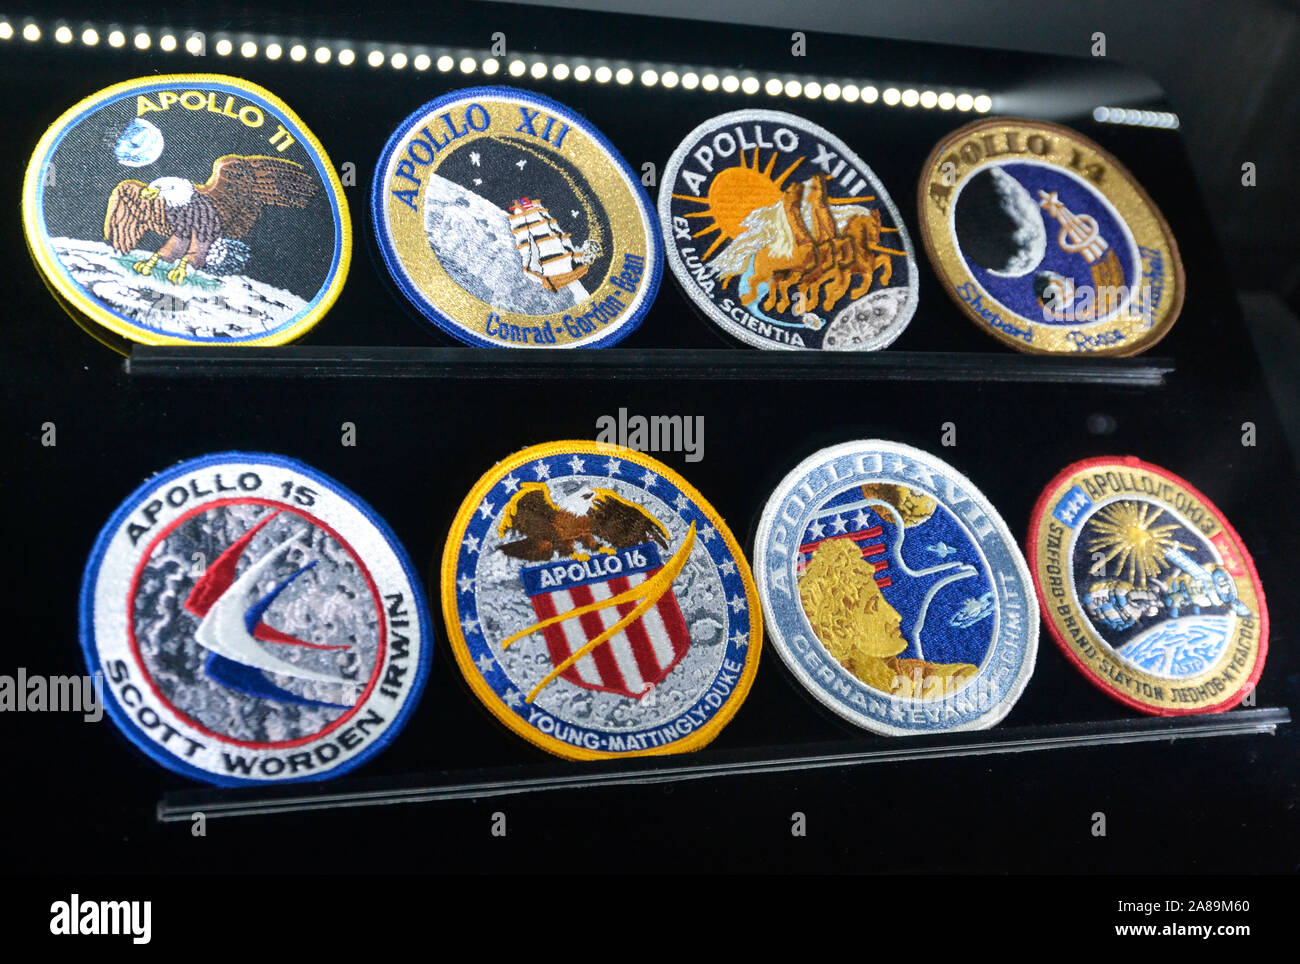 Astronaut's badges, marking Apollo Missions at the National Space Centre, Leicester, Leicestershire, UK Stock Photo